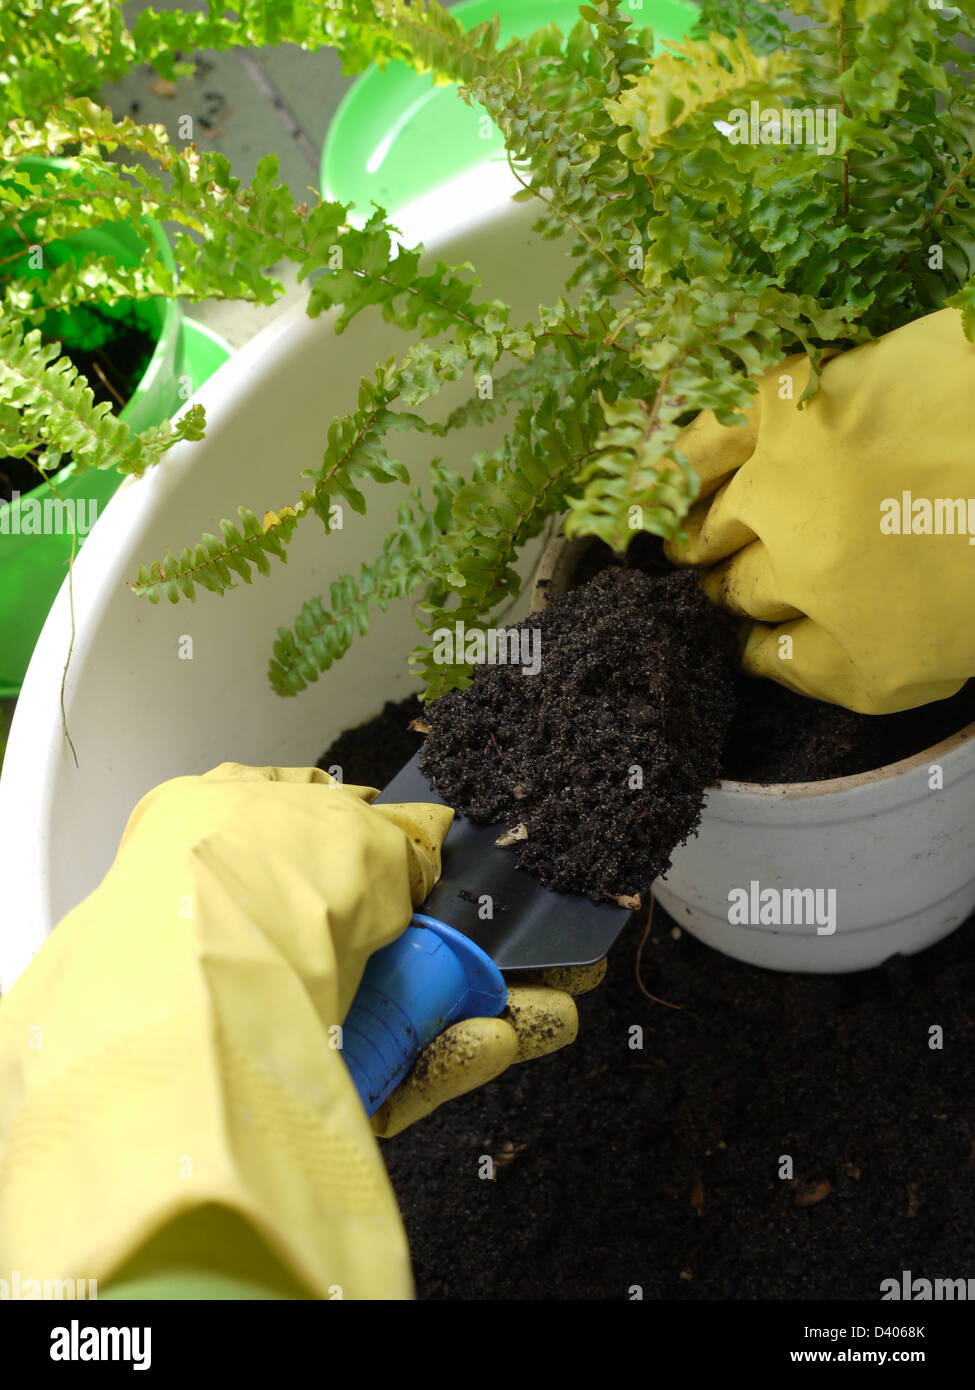 Closeup of gardener's hands wearing rubber gloves loading soil into pot with fern plant Stock Photo